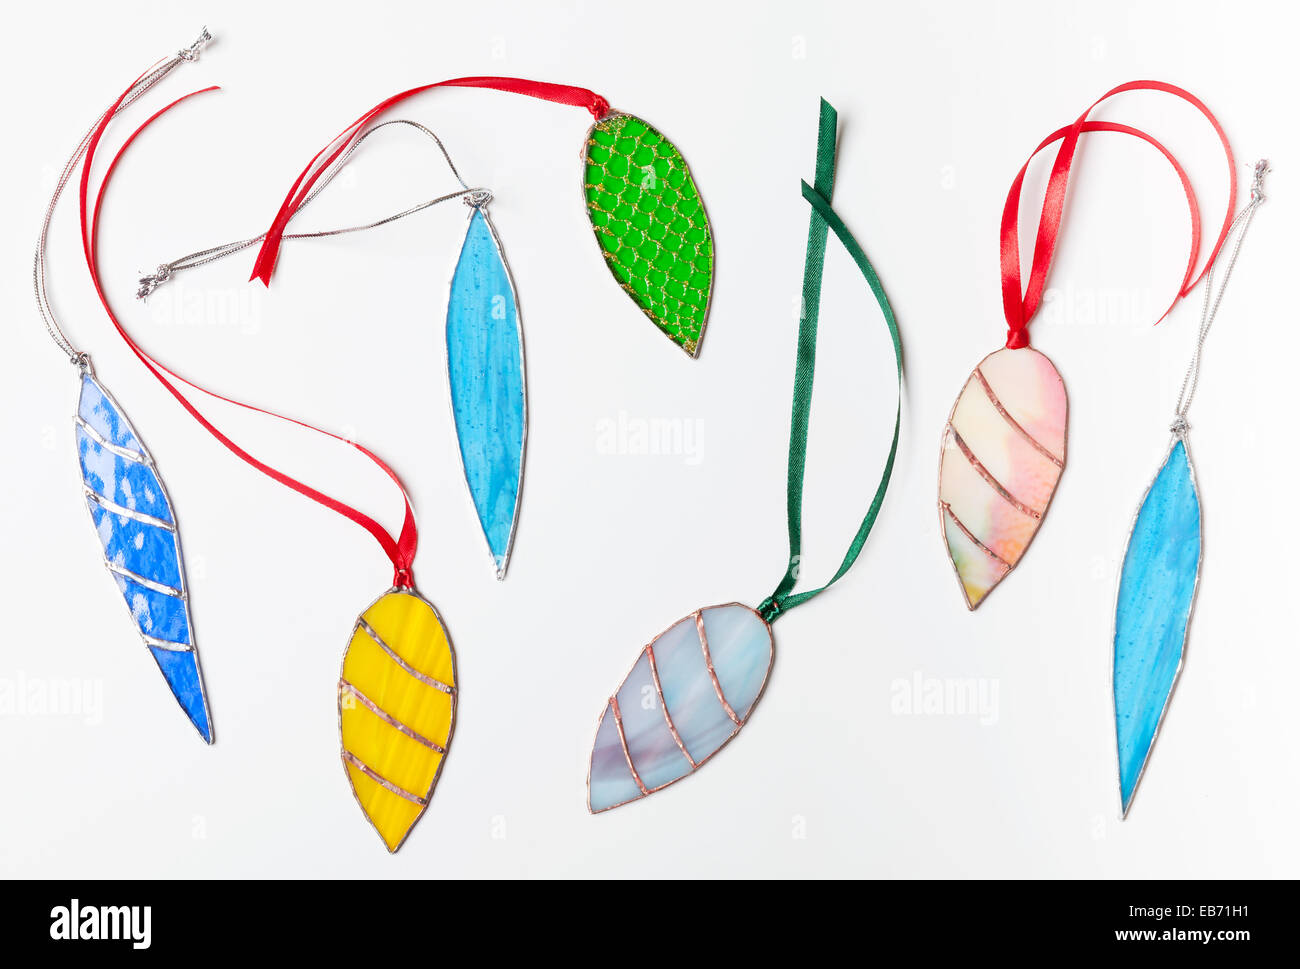 Set of stained glass handmade Christmas decor items on white background Stock Photo